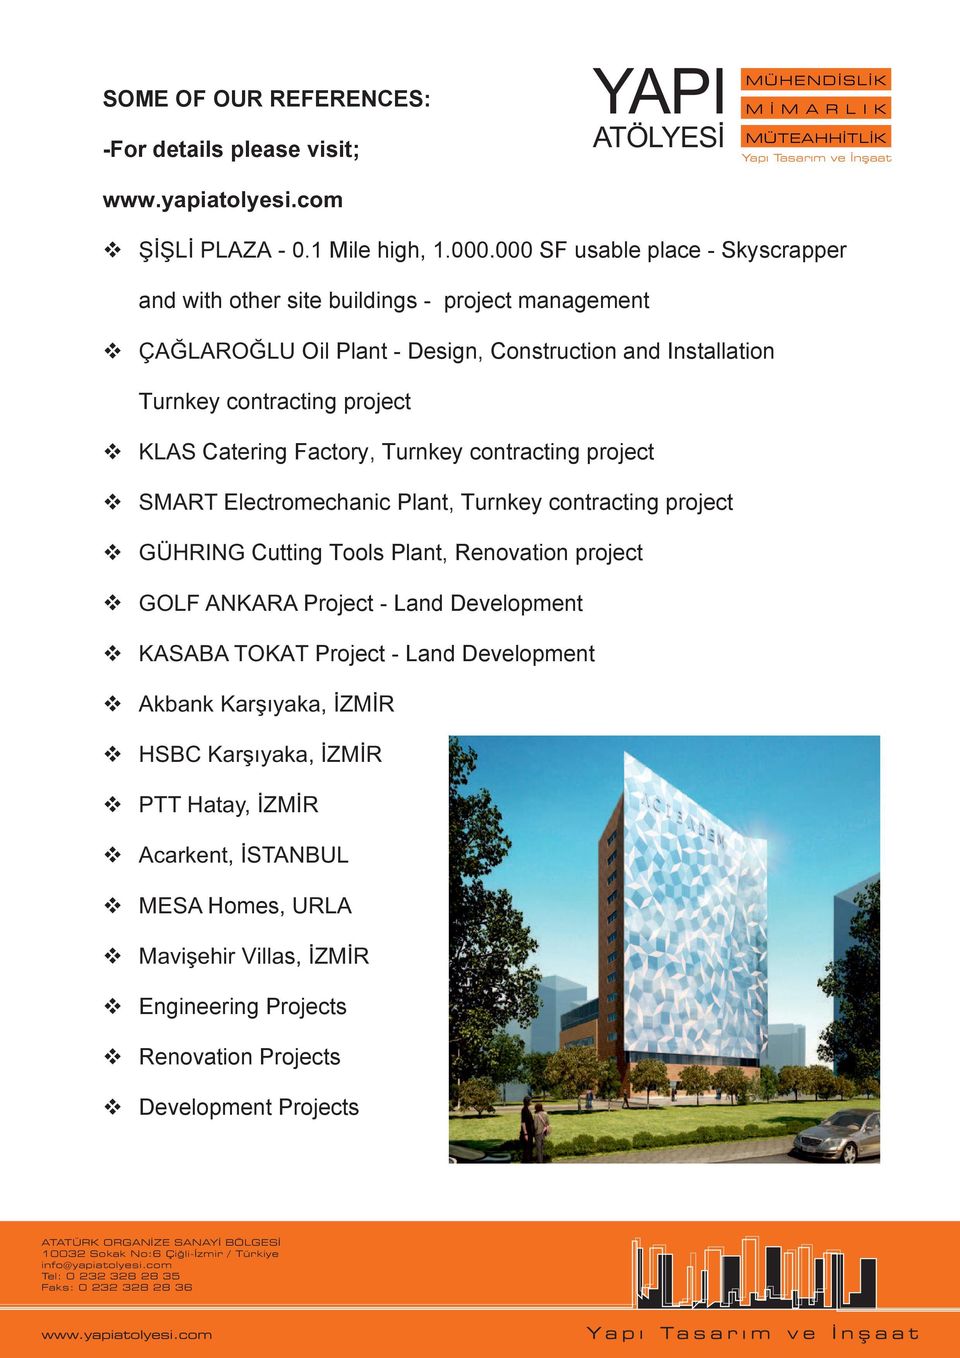 KLAS Catering Factory, Turnkey contracting project SMART Electromechanic Plant, Turnkey contracting project GÜHRING Cutting Tools Plant, Renovation project GOLF ANKARA Project